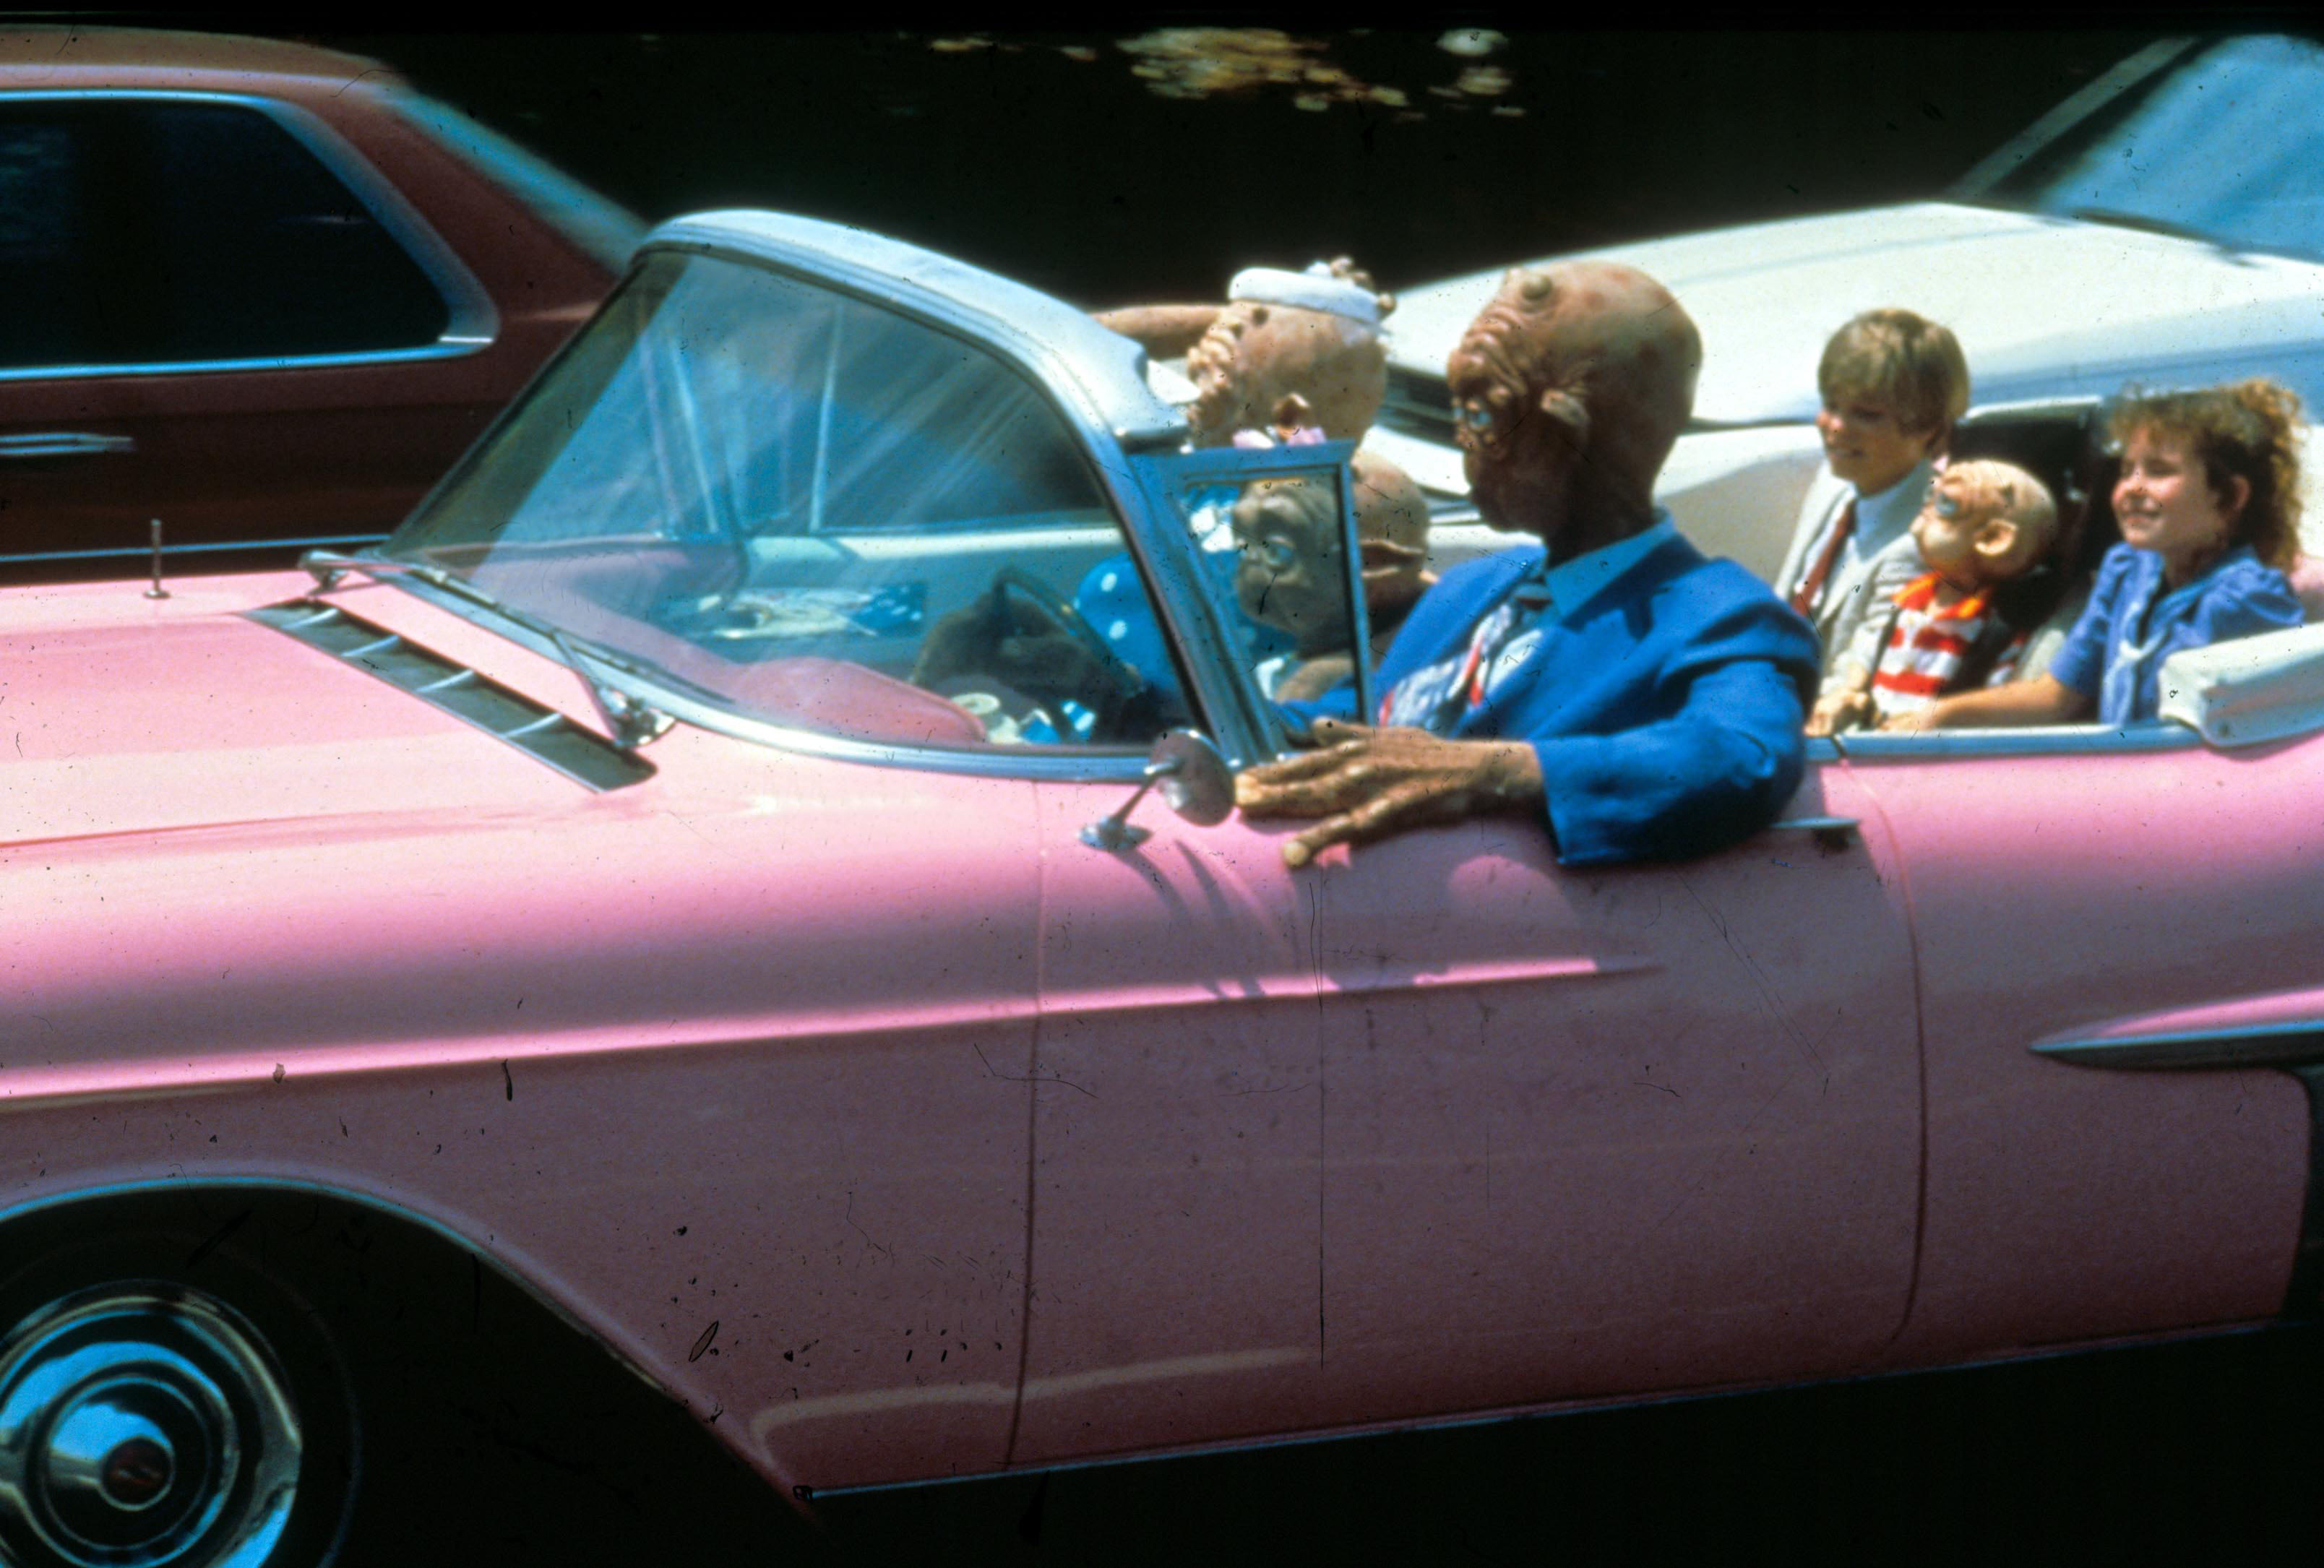 Aliens and kids in a pink convertible